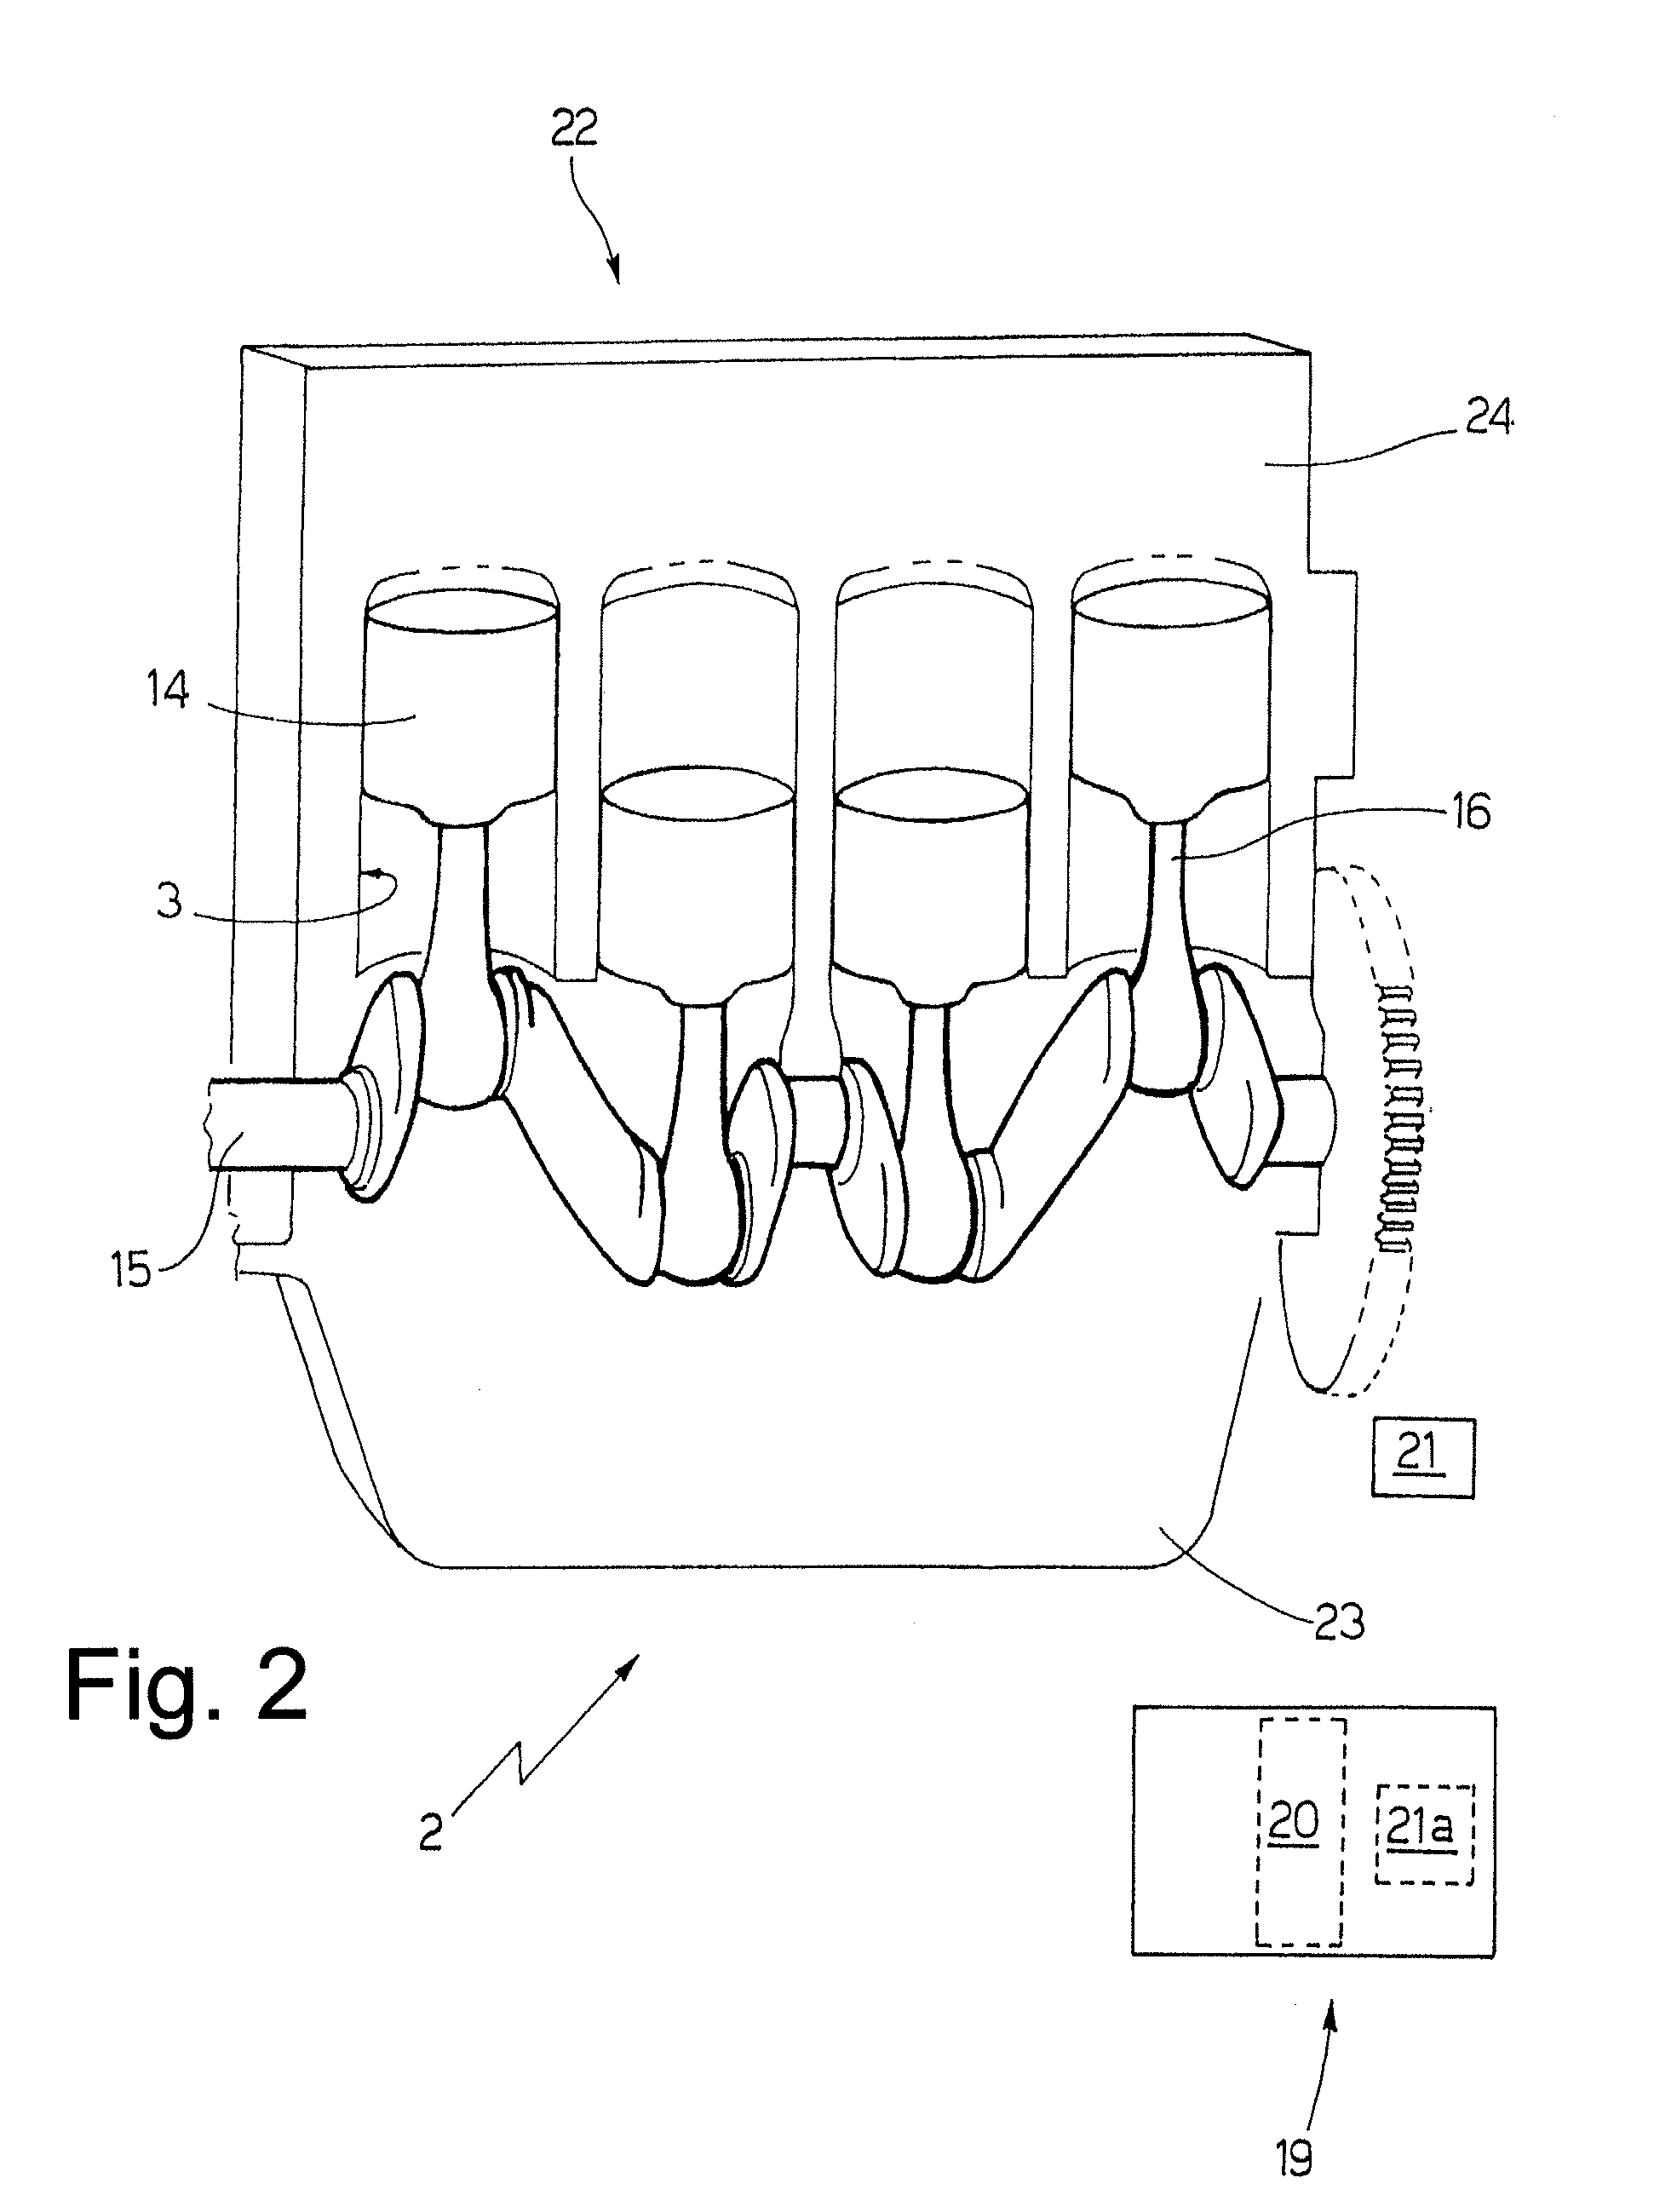 Method of microphone signal controlling an internal combustion engine